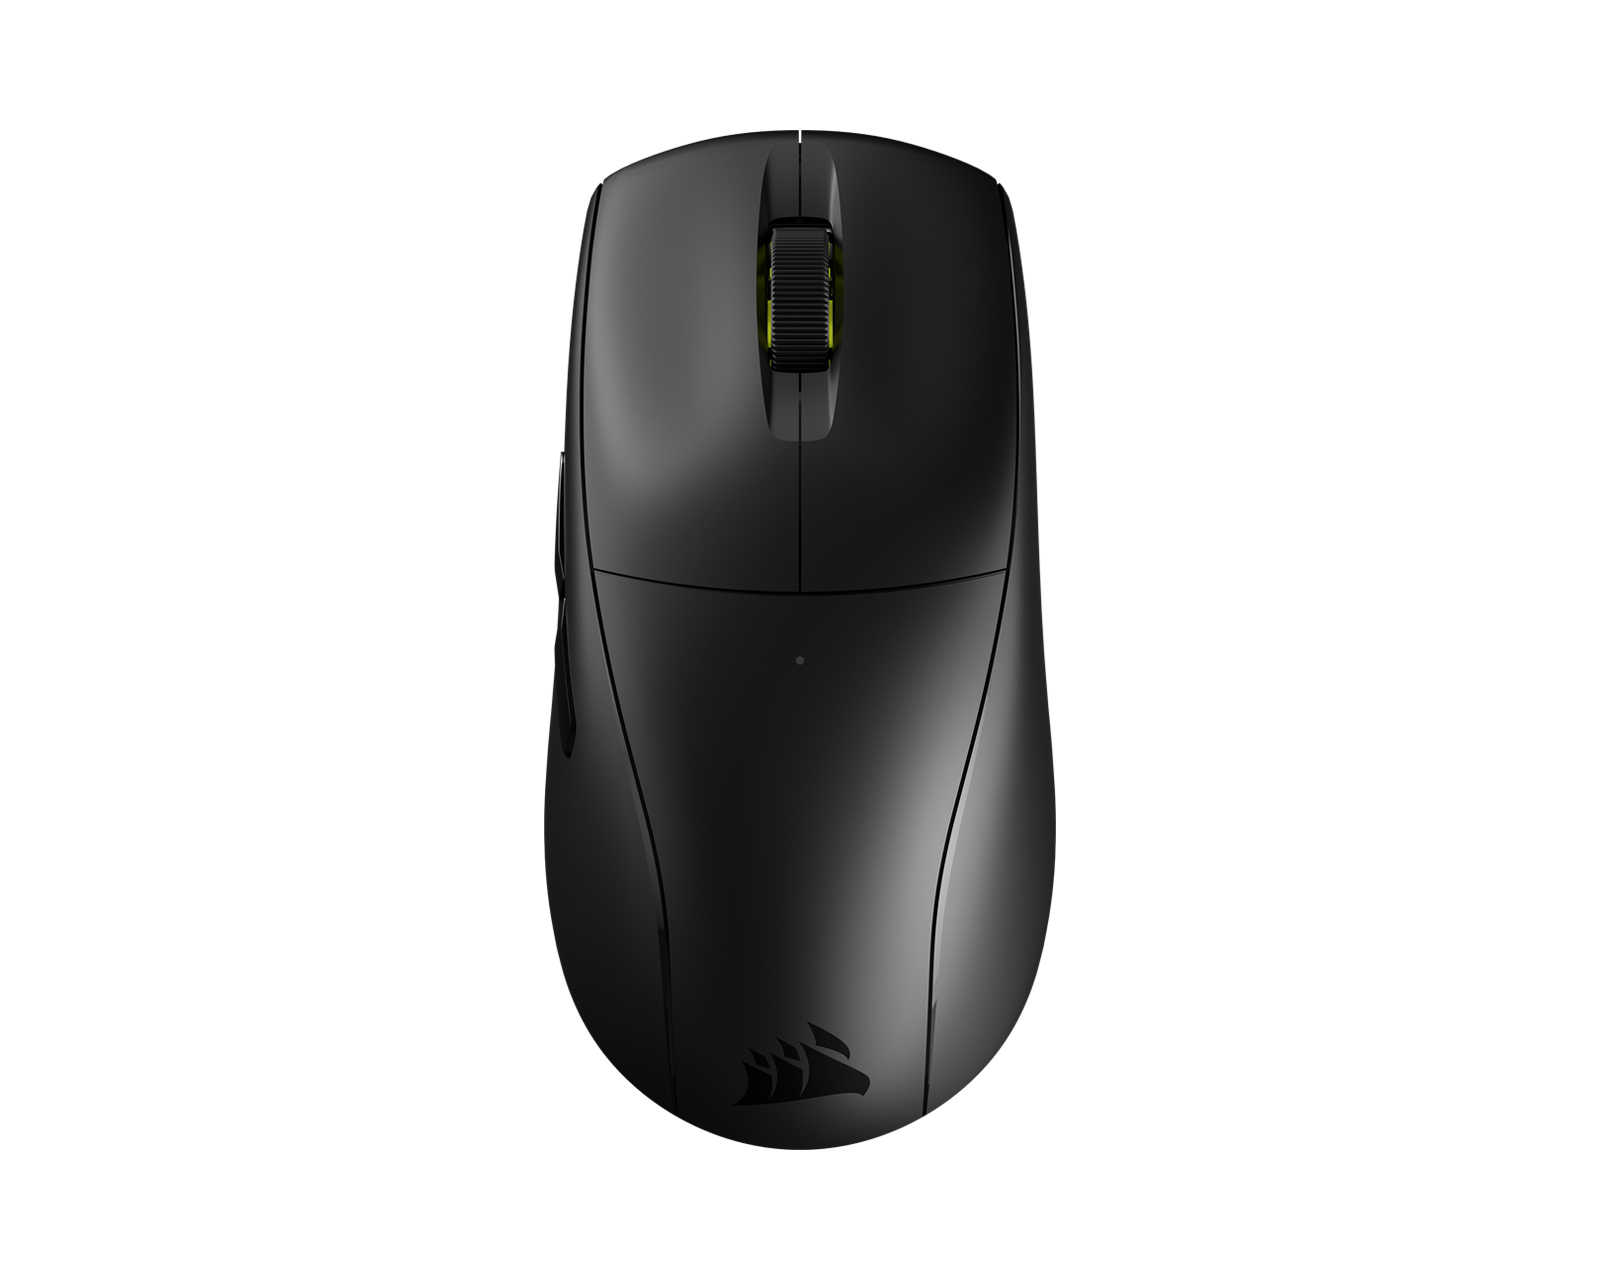 ROCCAT Expands Its Lightweight Symmetrical Mouse Series With the New Burst  Pro Air Wireless PC Gaming Mouse